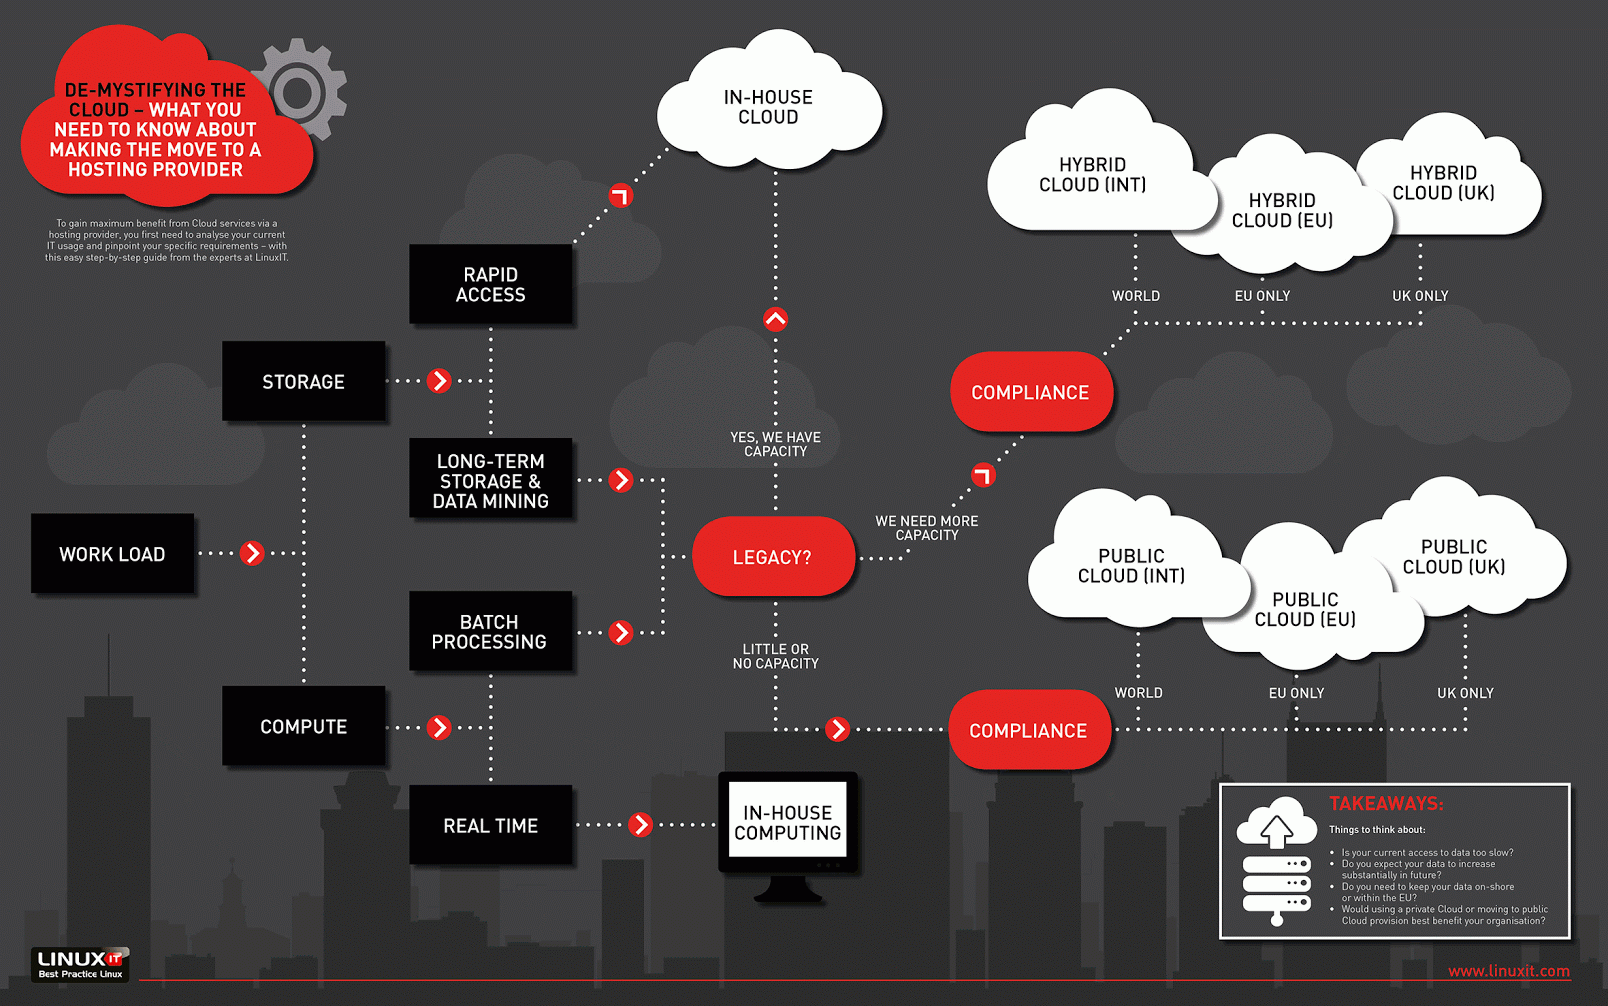 De-mystifying the Cloud - What You Need to Know about Making the Move to a Hosting Provider Infographic